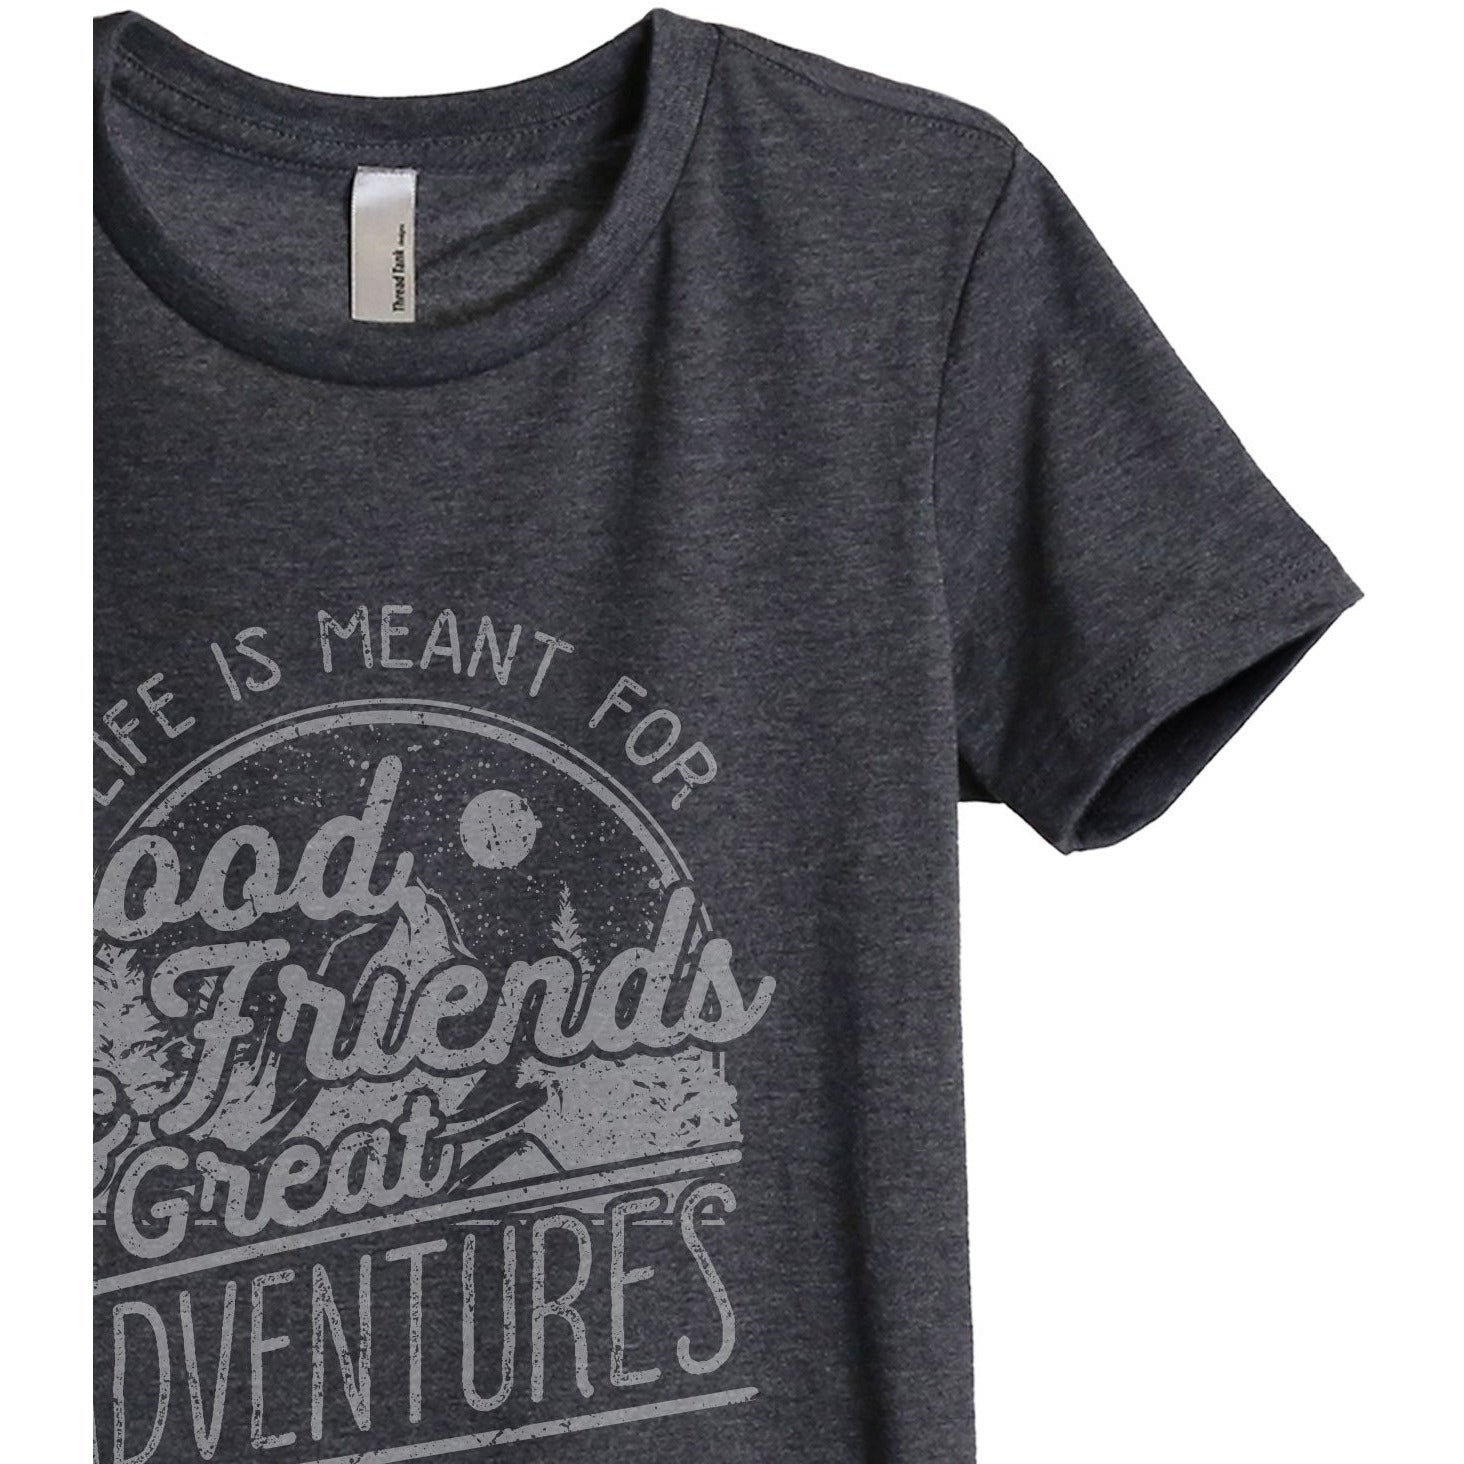 Good Friends And Great Adventures Women's Relaxed Crewneck T-Shirt Top Tee Charcoal Grey
